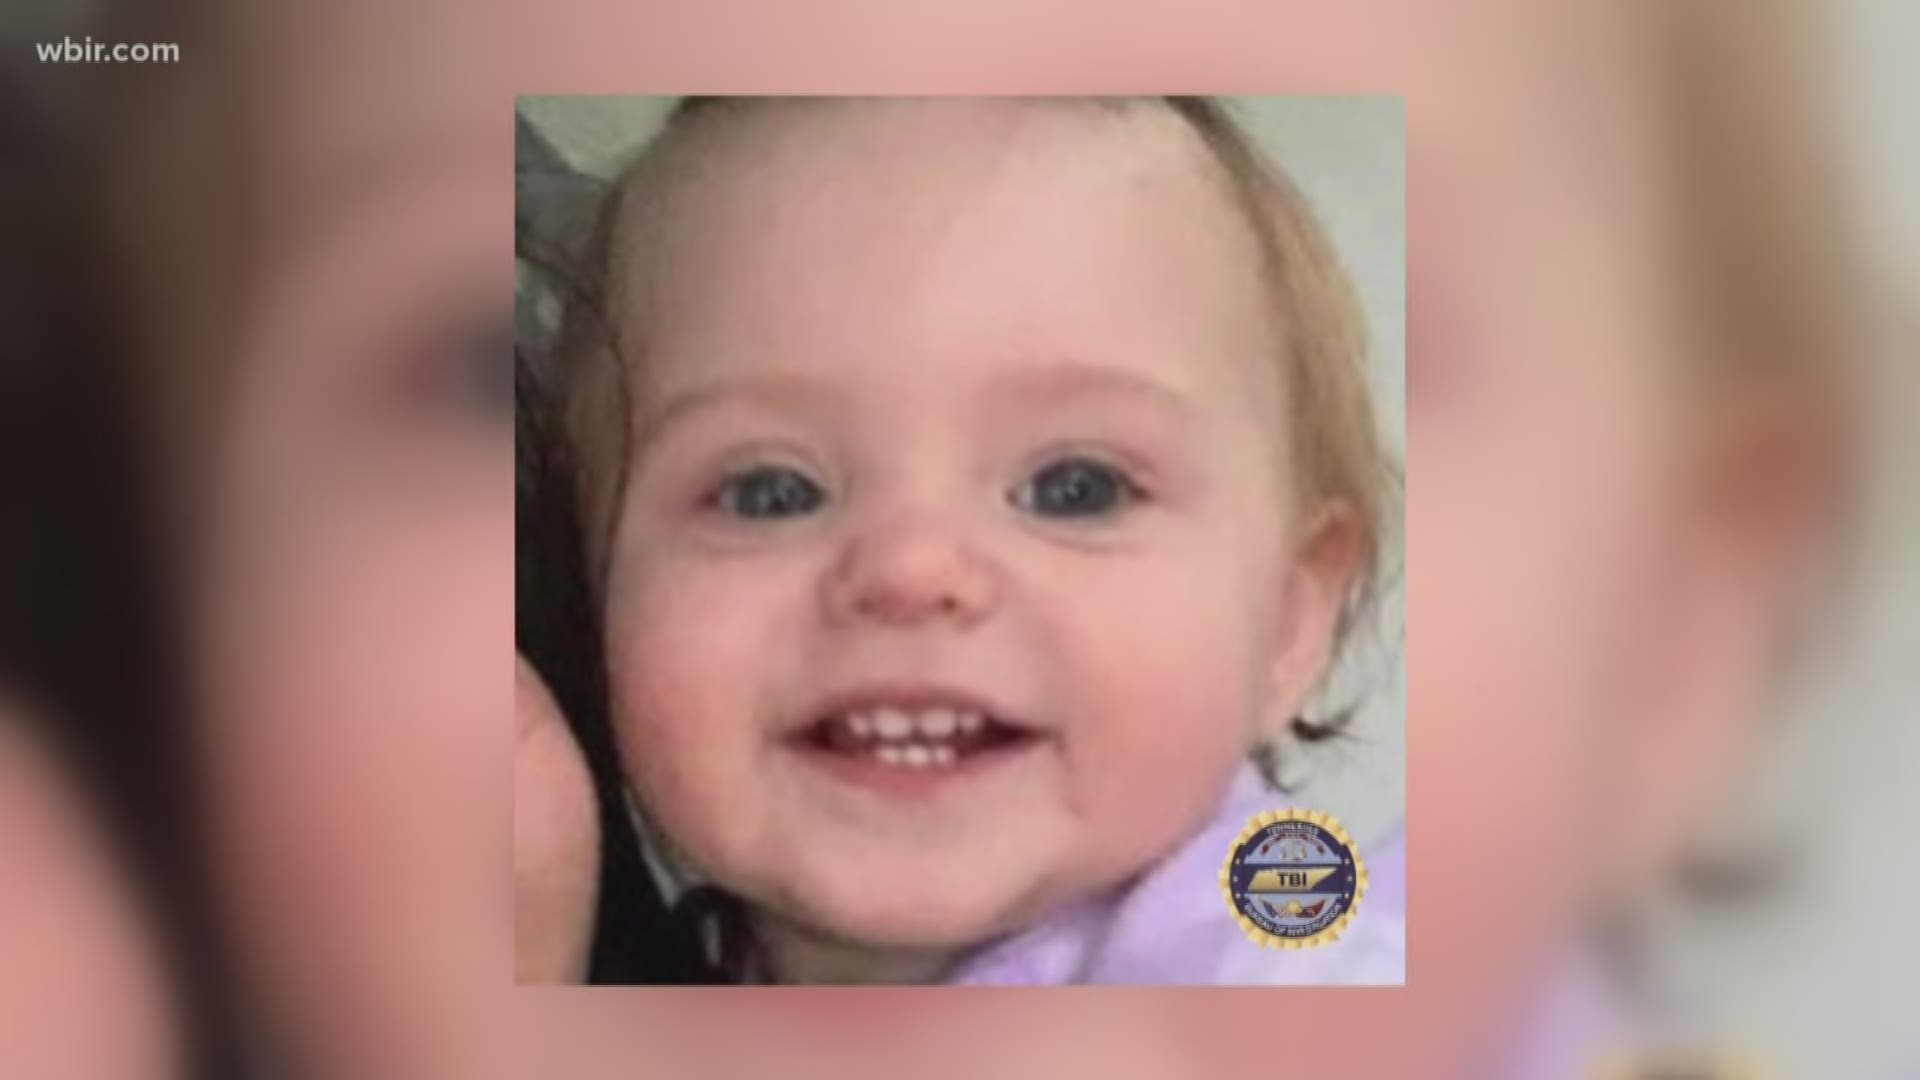 Evelyn Boswell, 15-months old, is missing, more than two months after investigators believe she was last seen. If you have information, call 1-800-TBI-FIND.